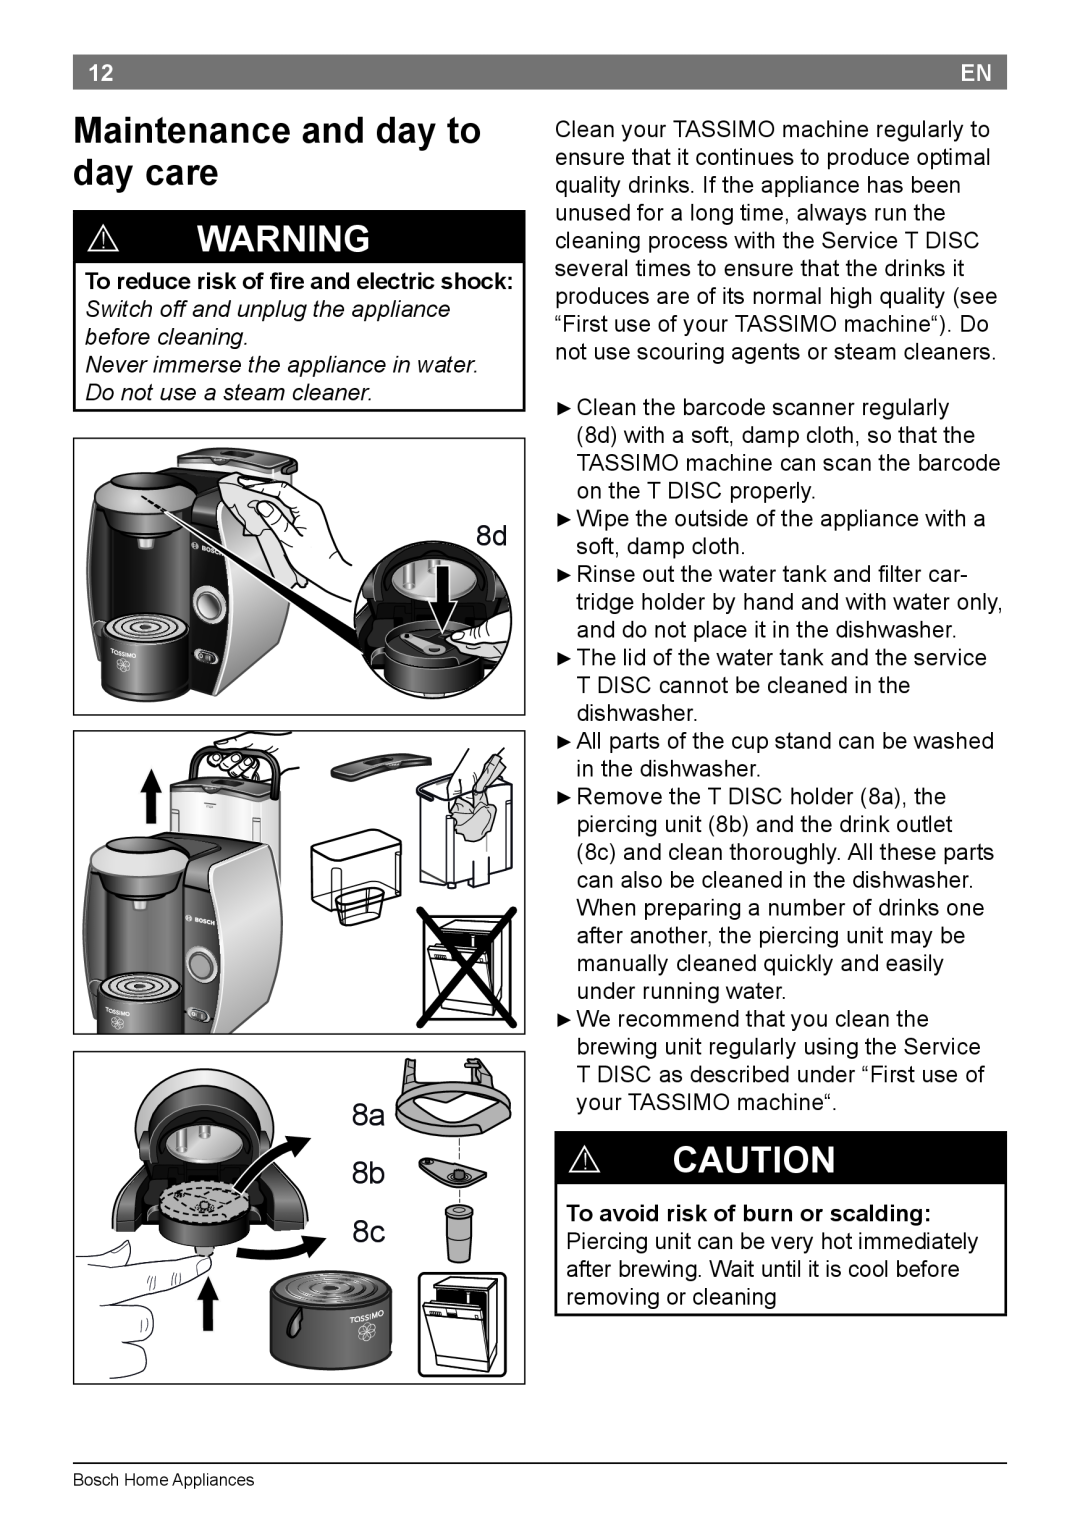 Bosch Appliances T45 instruction manual Maintenance and day to day care, ! Warning, ! Caution 